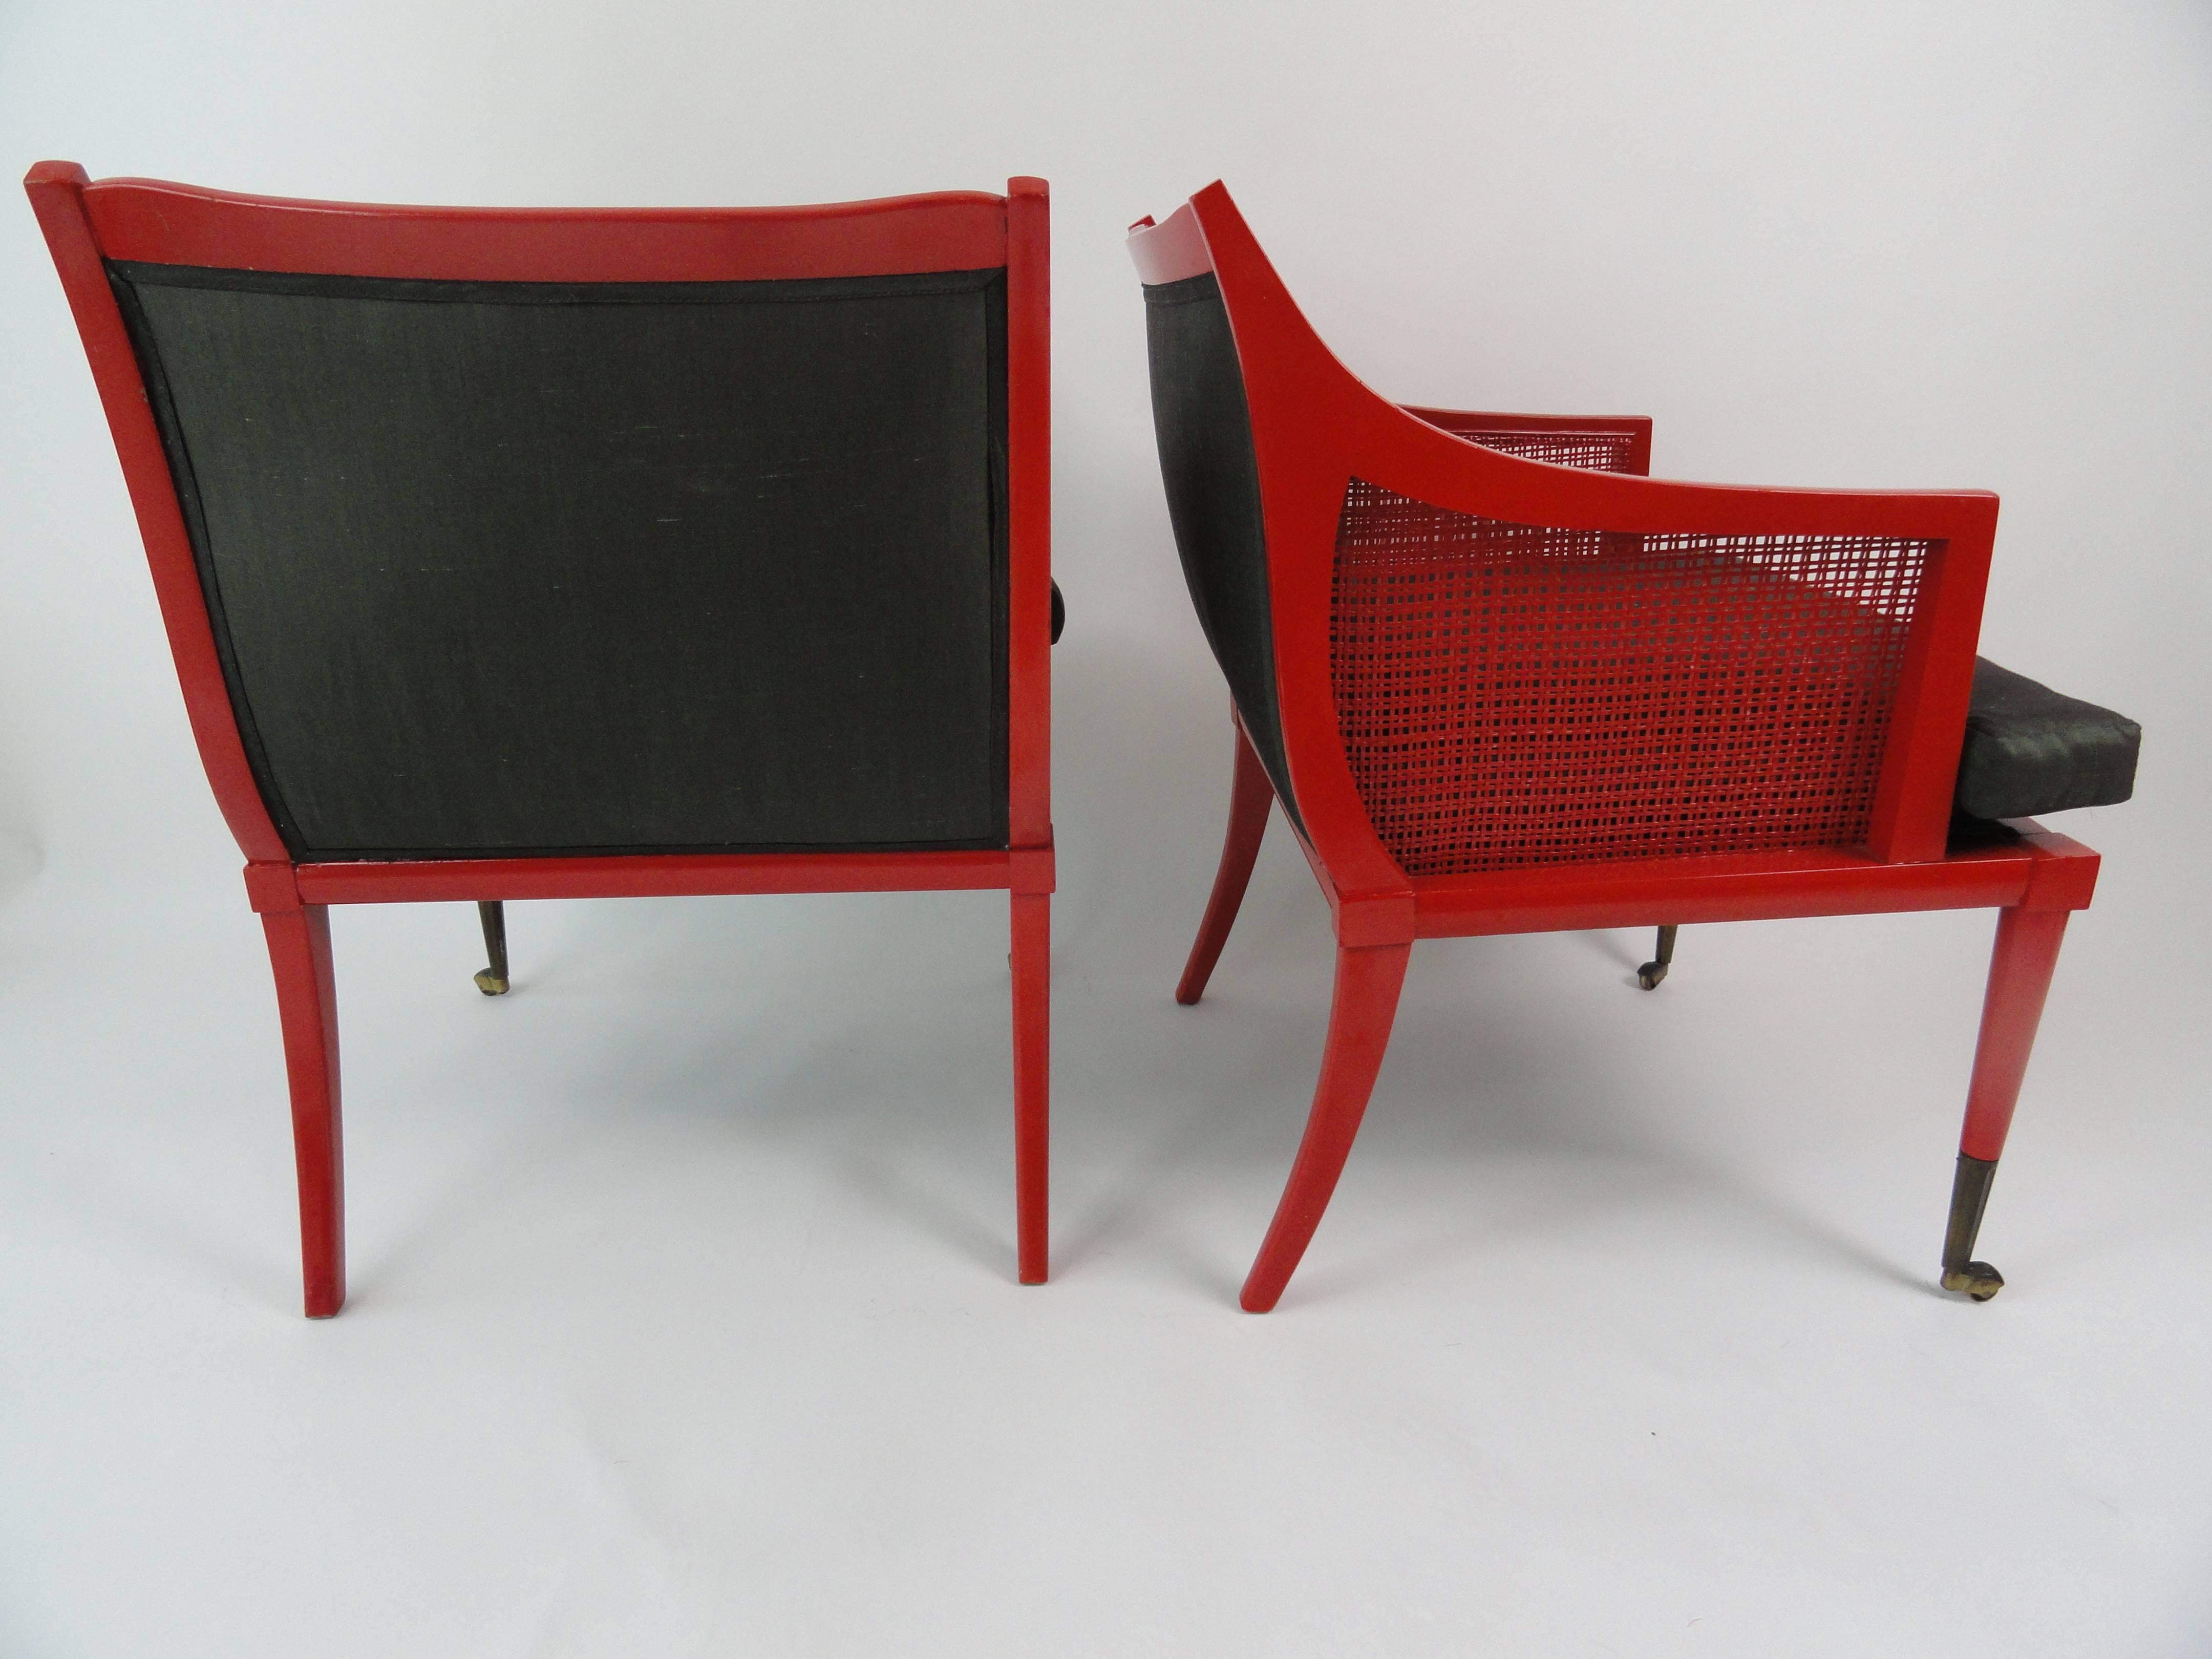 Pair of red lacquer wood chairs, sculptural form with brass sabot, cane sides. Modernist style by Edward Wormley for Dunbar.
Henry Calvin Athena Taffeta
Very comfortable.